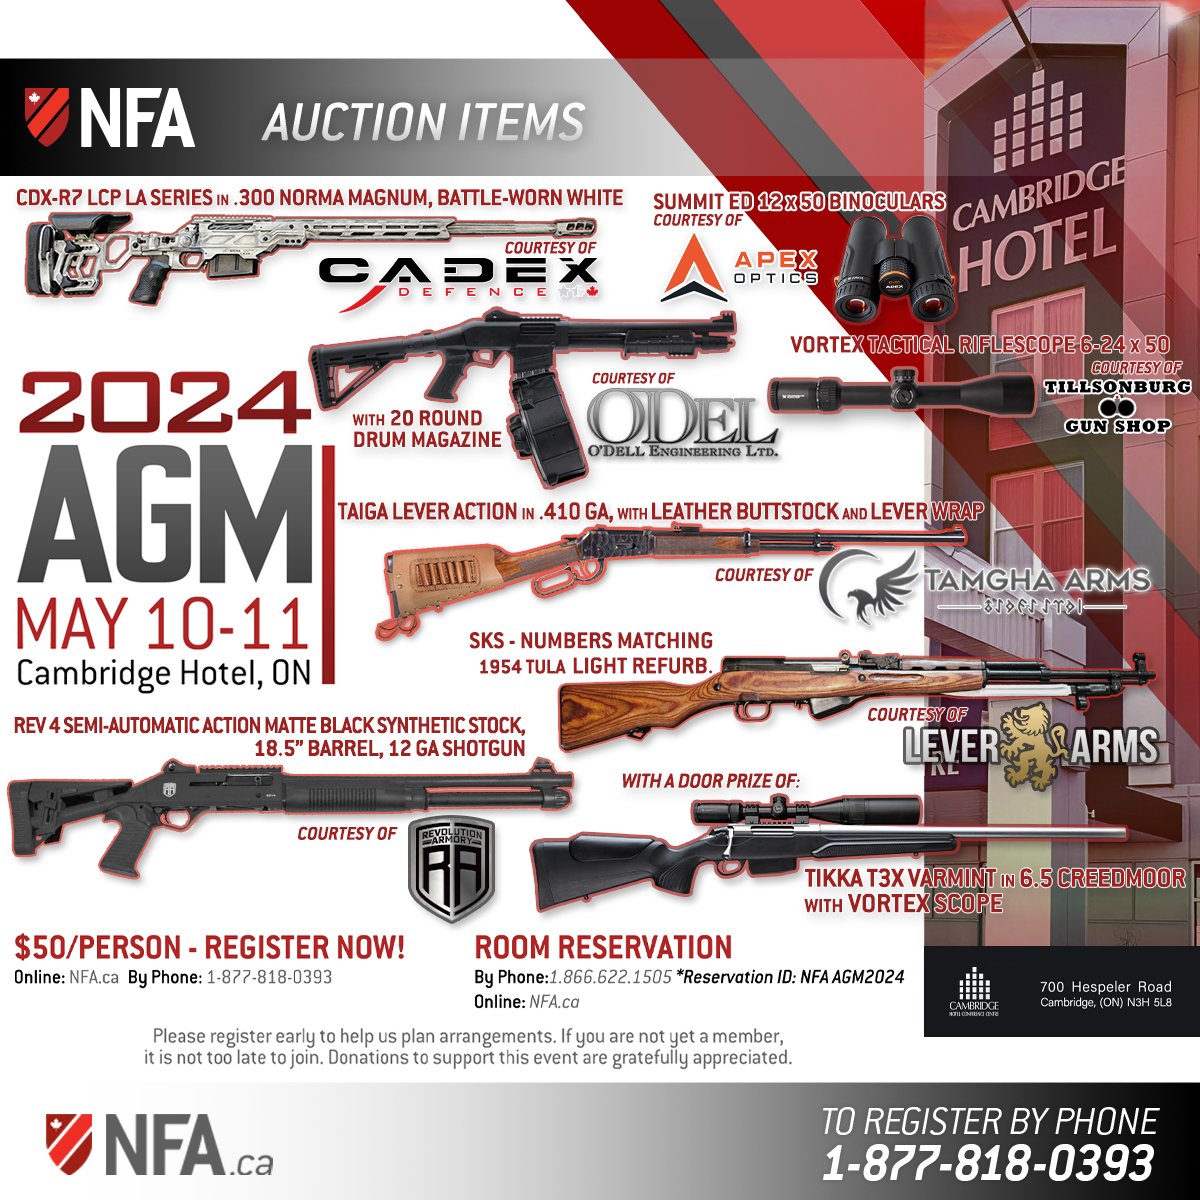 By Request, all AGM Auction items on 1pg Unfortunately, we cannot post this on FB. The AI is relentlessly 'deficient', as are the moderators. But, our lineup is fantastic!🙏to @Cadexdefence , @apex_optics , O'Dell, Tillsonburg Gun Shop, Tamgha Arms, Lever Arms, & @RevolutionArmo2